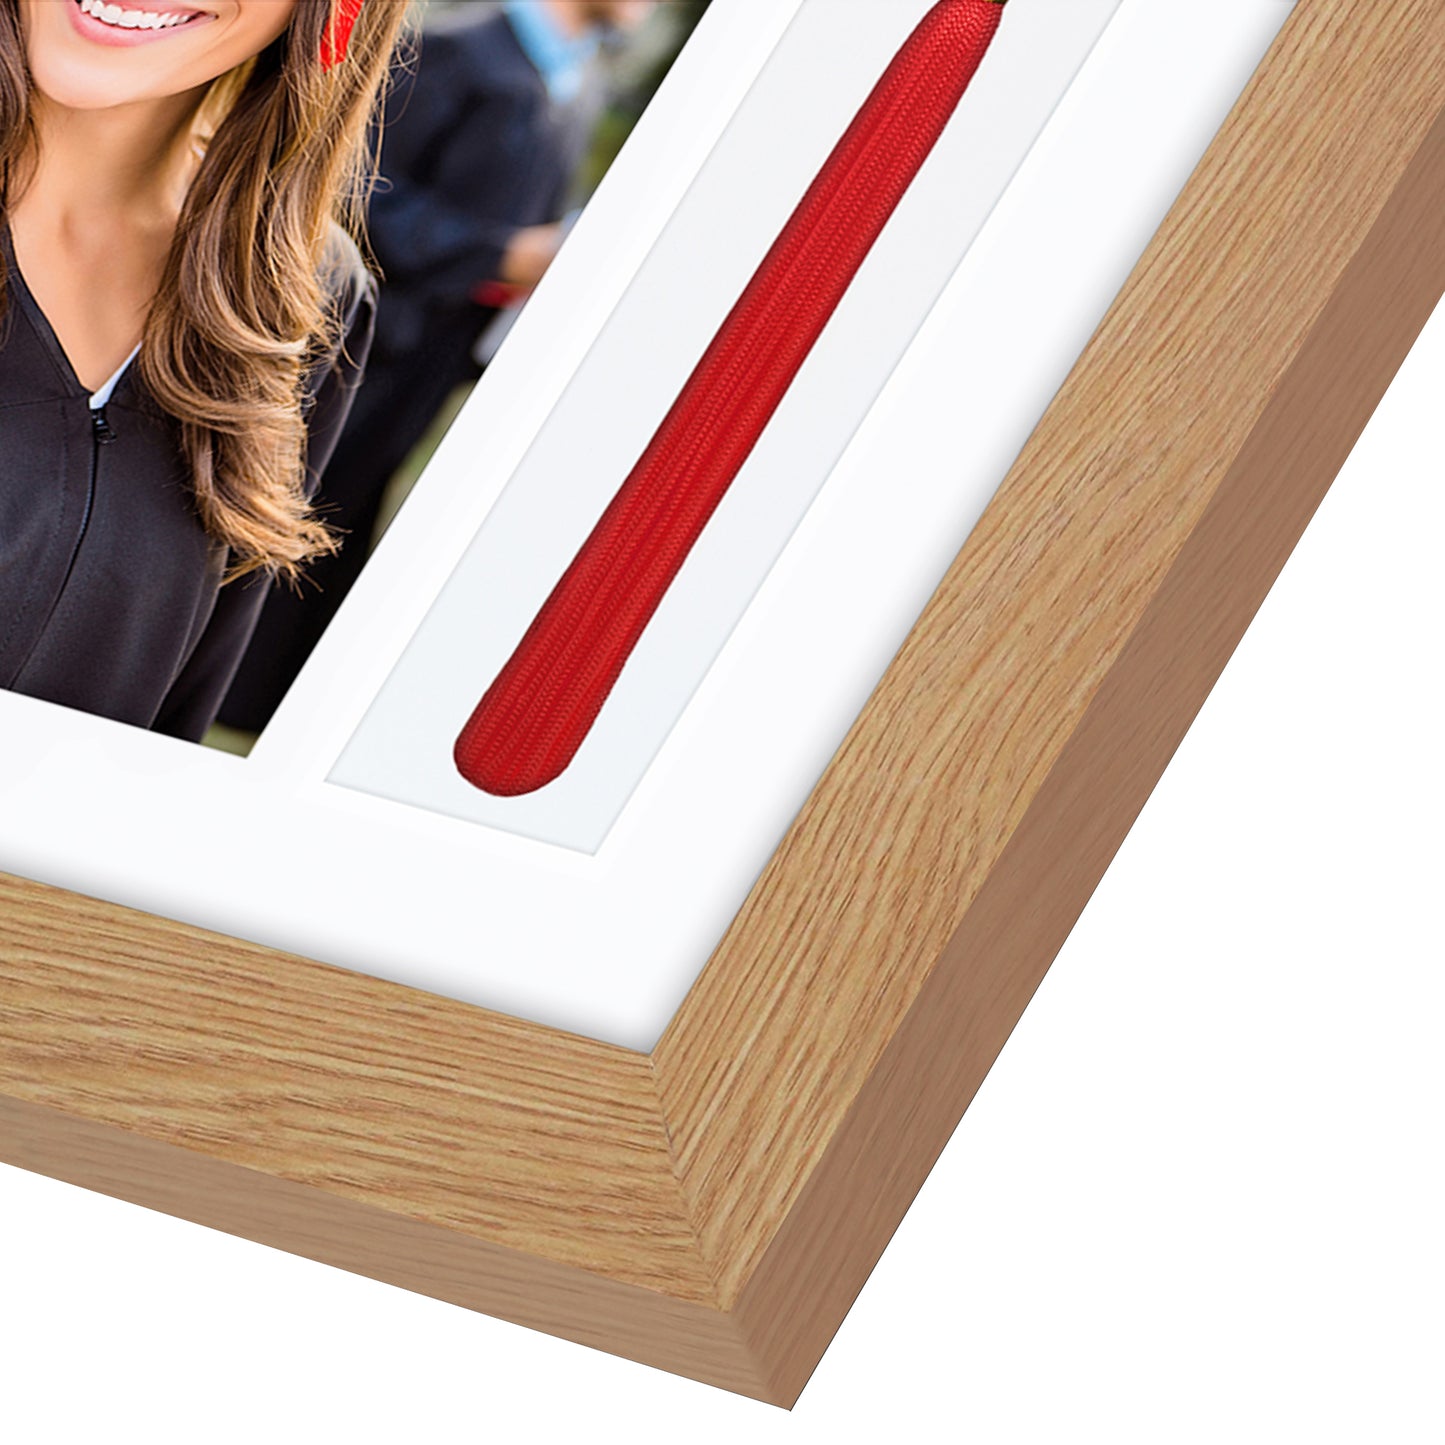 13x13 Graduation Frame with 8x10 Picture Frame Duo | Choose Color